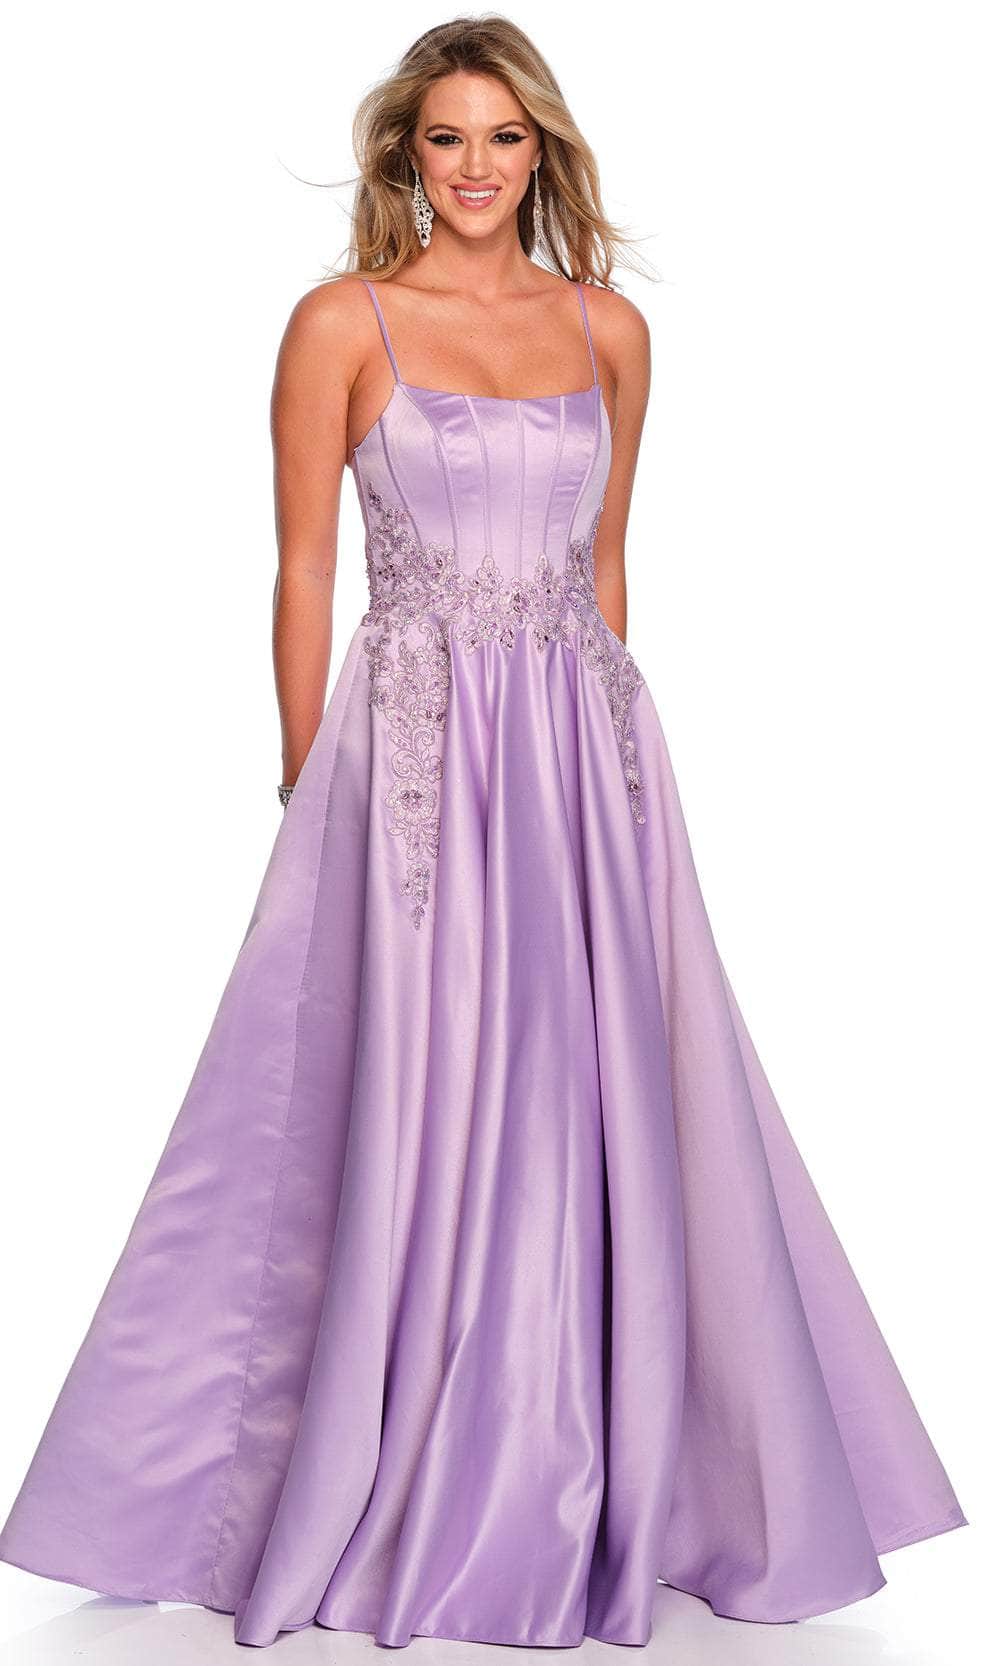 Dave & Johnny 11338 - Spaghetti Strap Satin Prom Gown Special Occasion Dress 00 /  Lilac